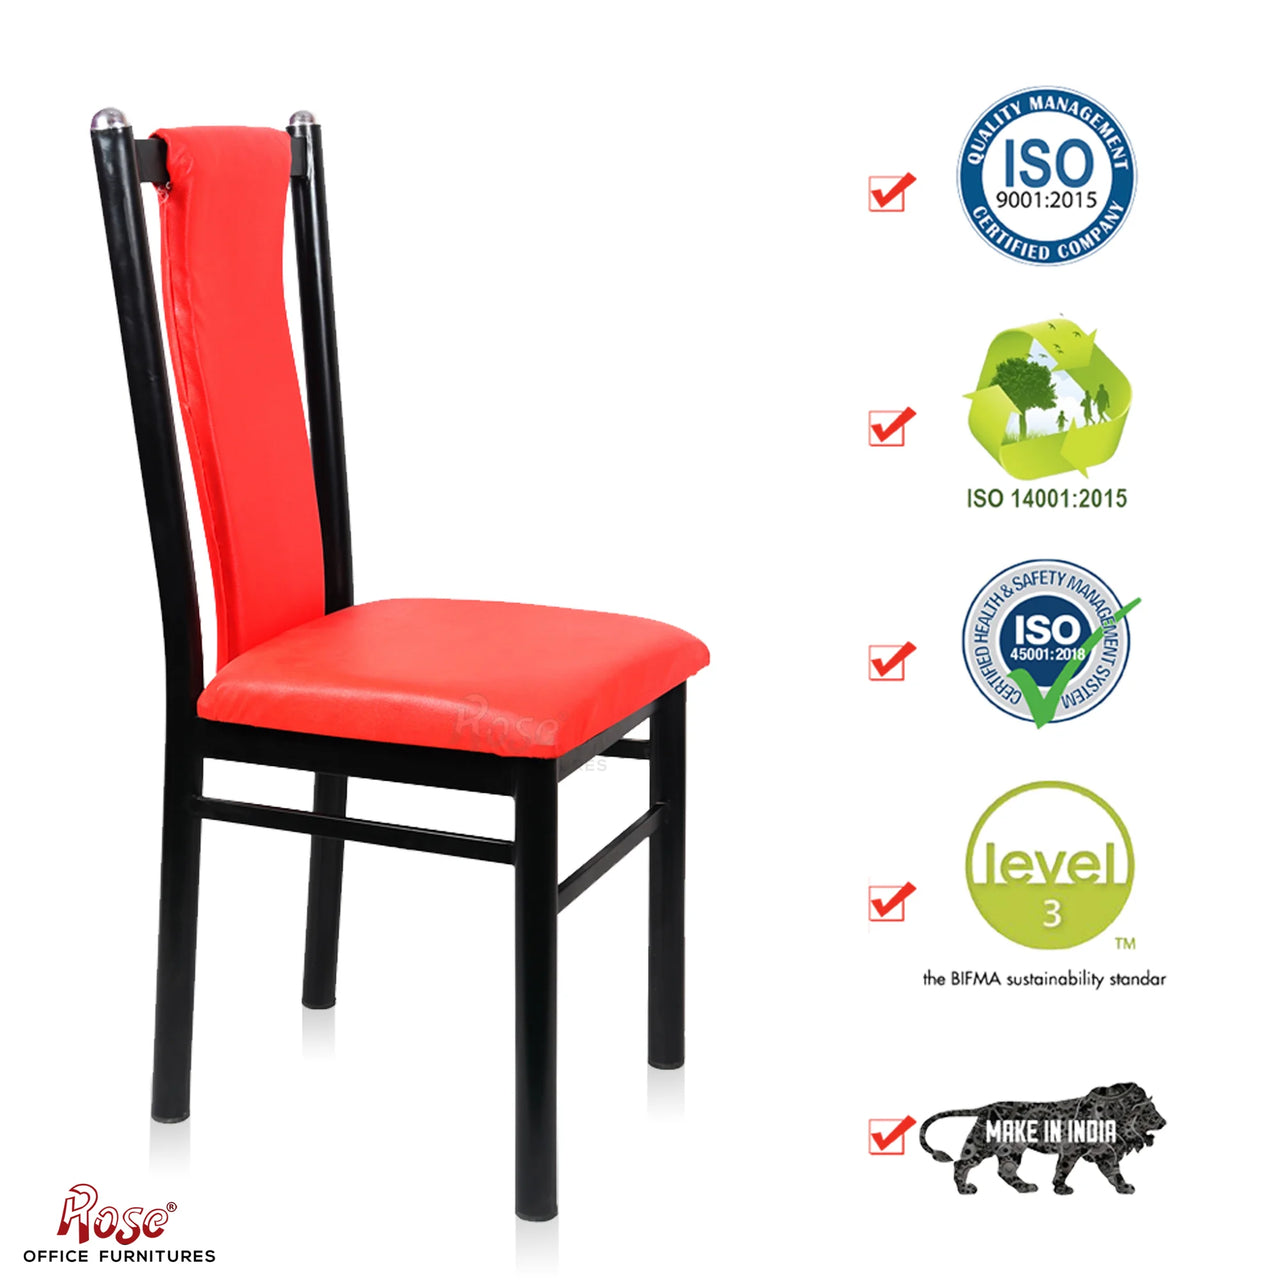 Duke Dinning Chairs for Kitchen & Dining Room (Red)